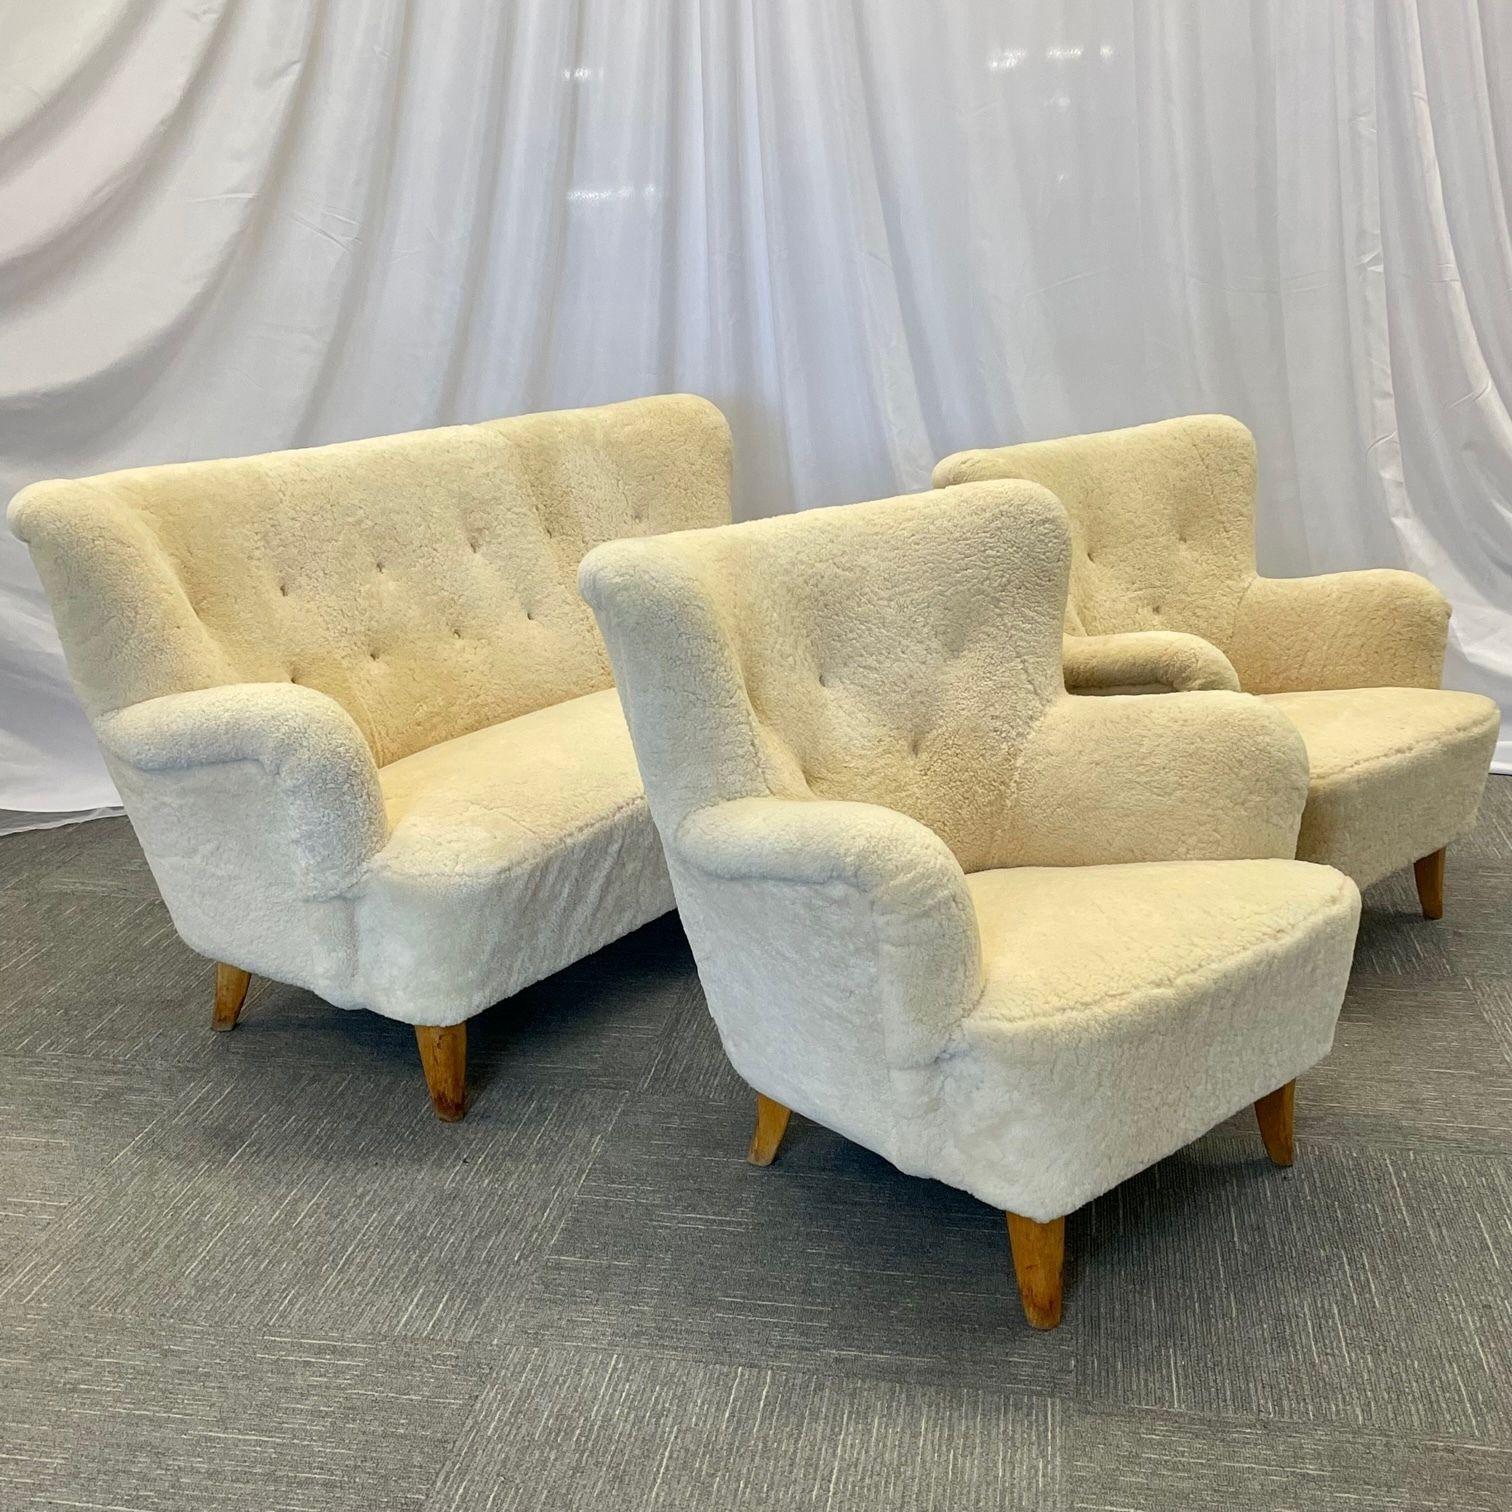 Mid-Century Modern 'Laila' Sofa Set by Ilmari Lappalainen for Asko, Finland; Settee and Lounge Chairs
 
Chic and stylish Finnish designer 5-seater sofa set newly upholstered in genuine cream Sheepskin. Both the sofa and the pair of lounge chairs